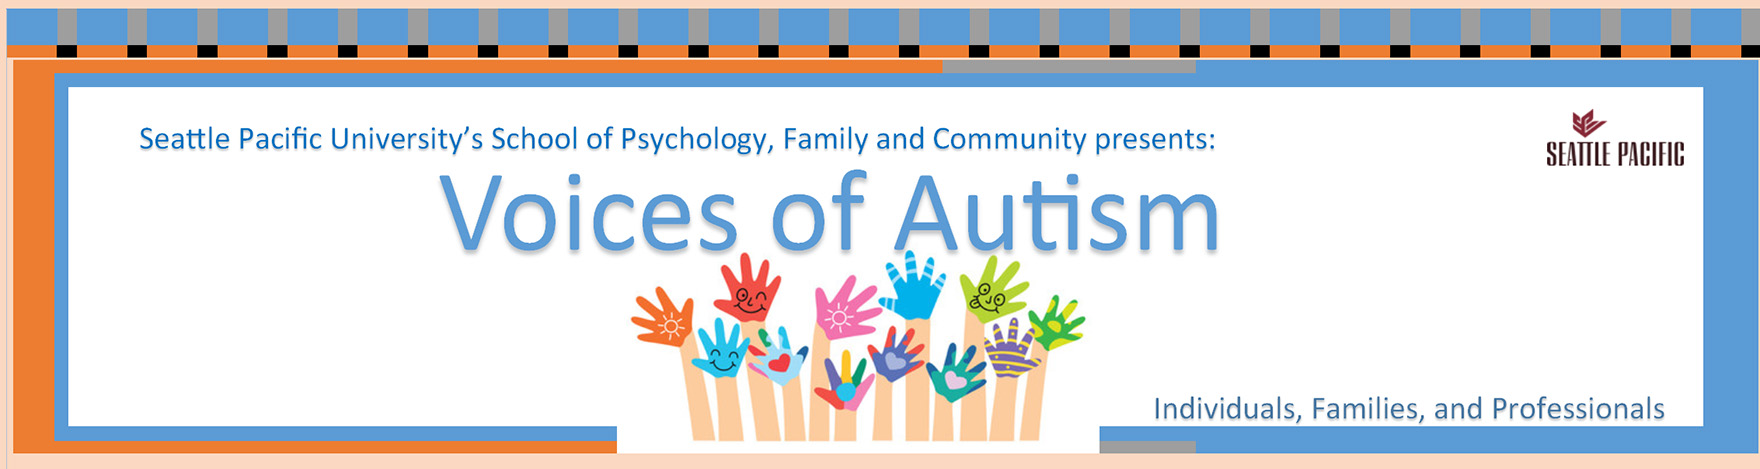 Seattle Pacific University's School of Psychology, Family and Community presents: Voices of Autism | Individuals, Families, and Professionals